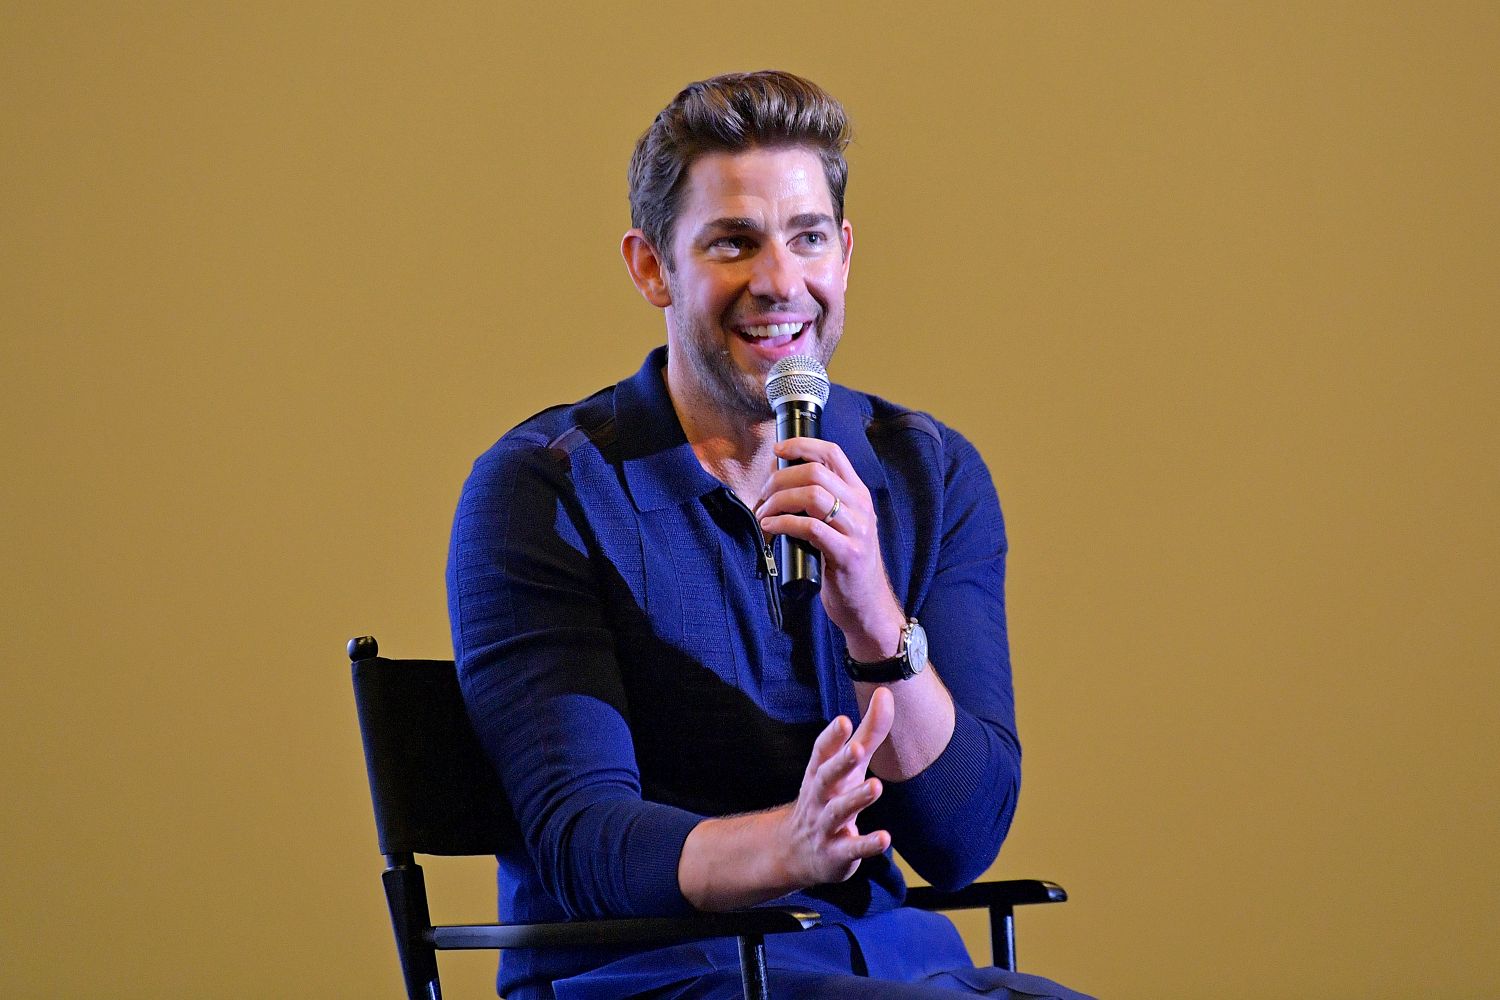 John Krasinski teases 'The Office' reunion in 'IF,' about imaginary friends